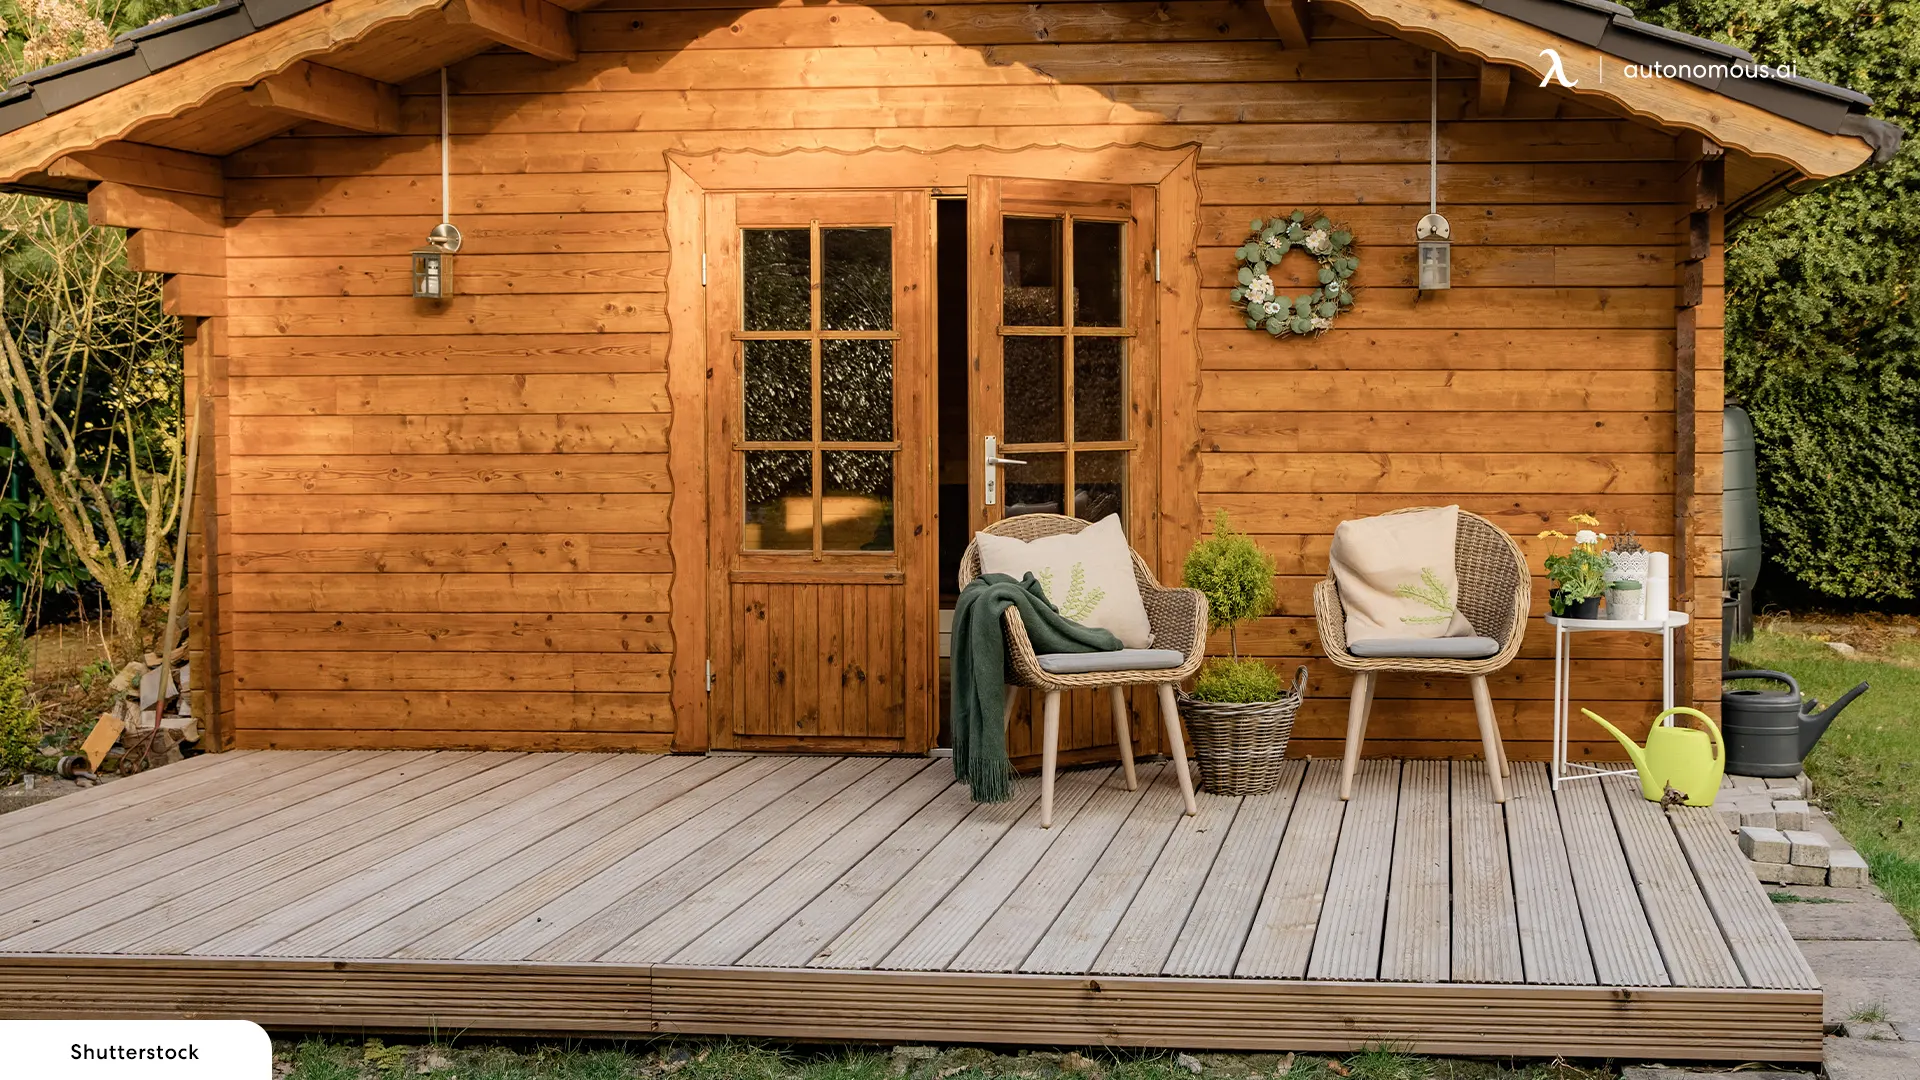 How to Choose Good Flooring Options for Your Wood Shed?